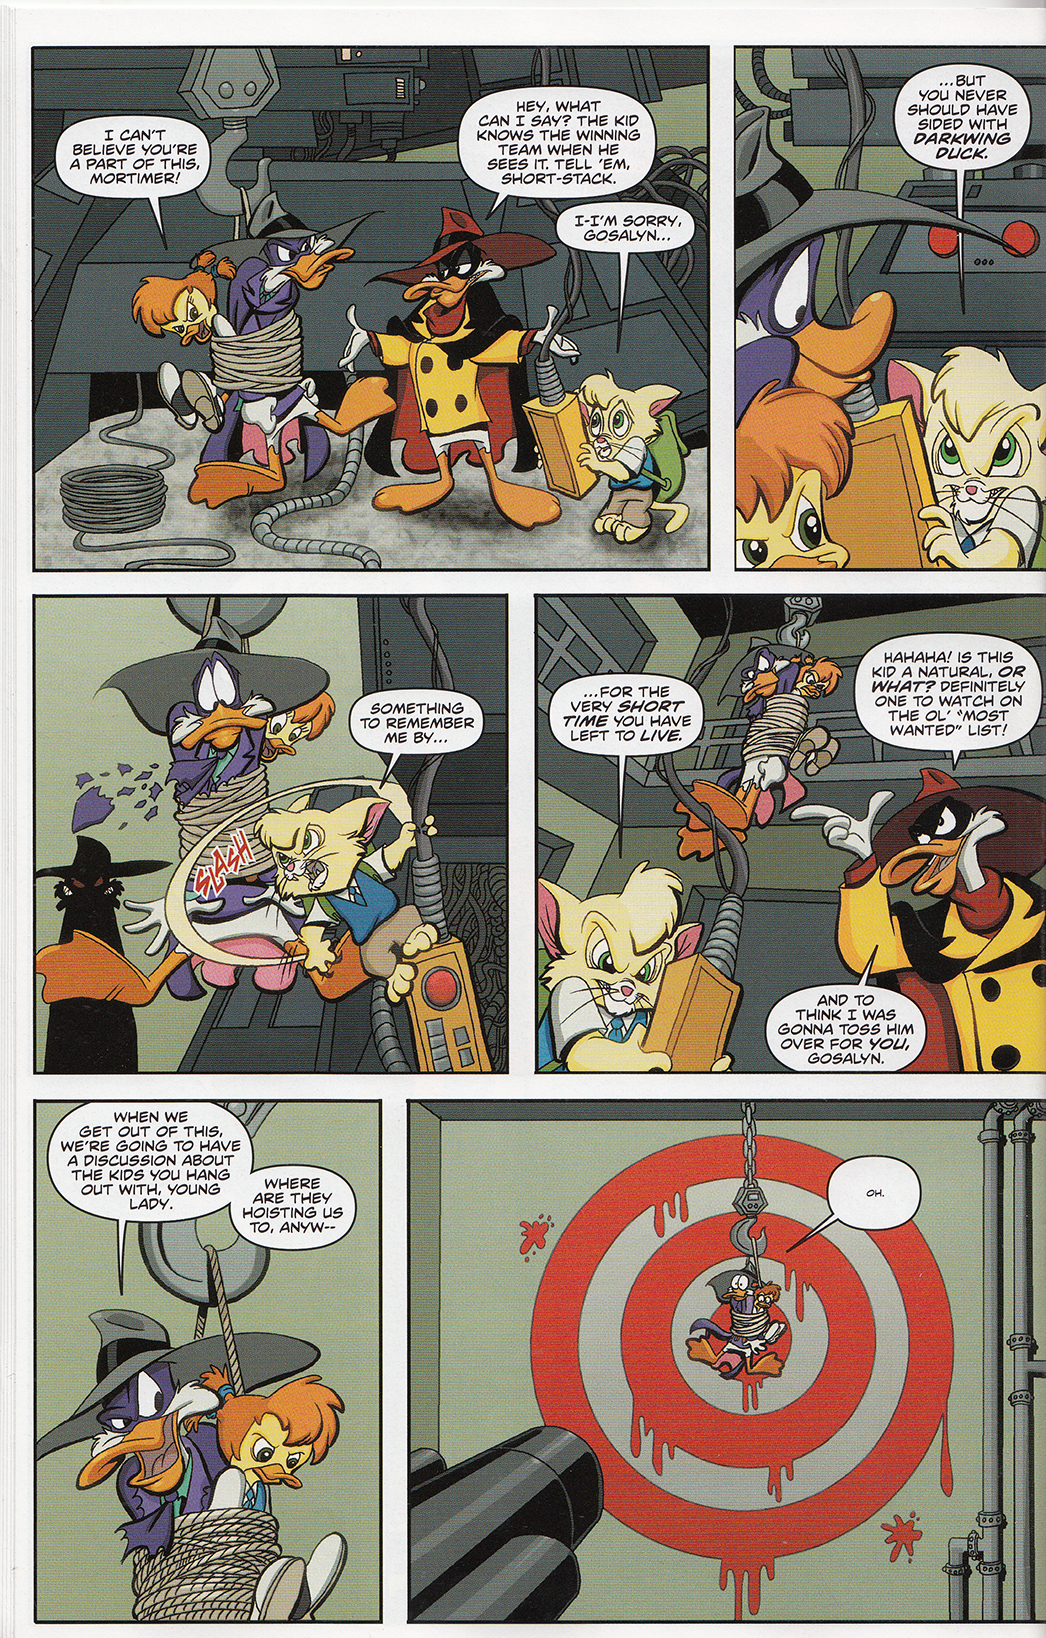 Disney Darkwing Duck Issue 3 Viewcomic Reading Comics Online For Free 19